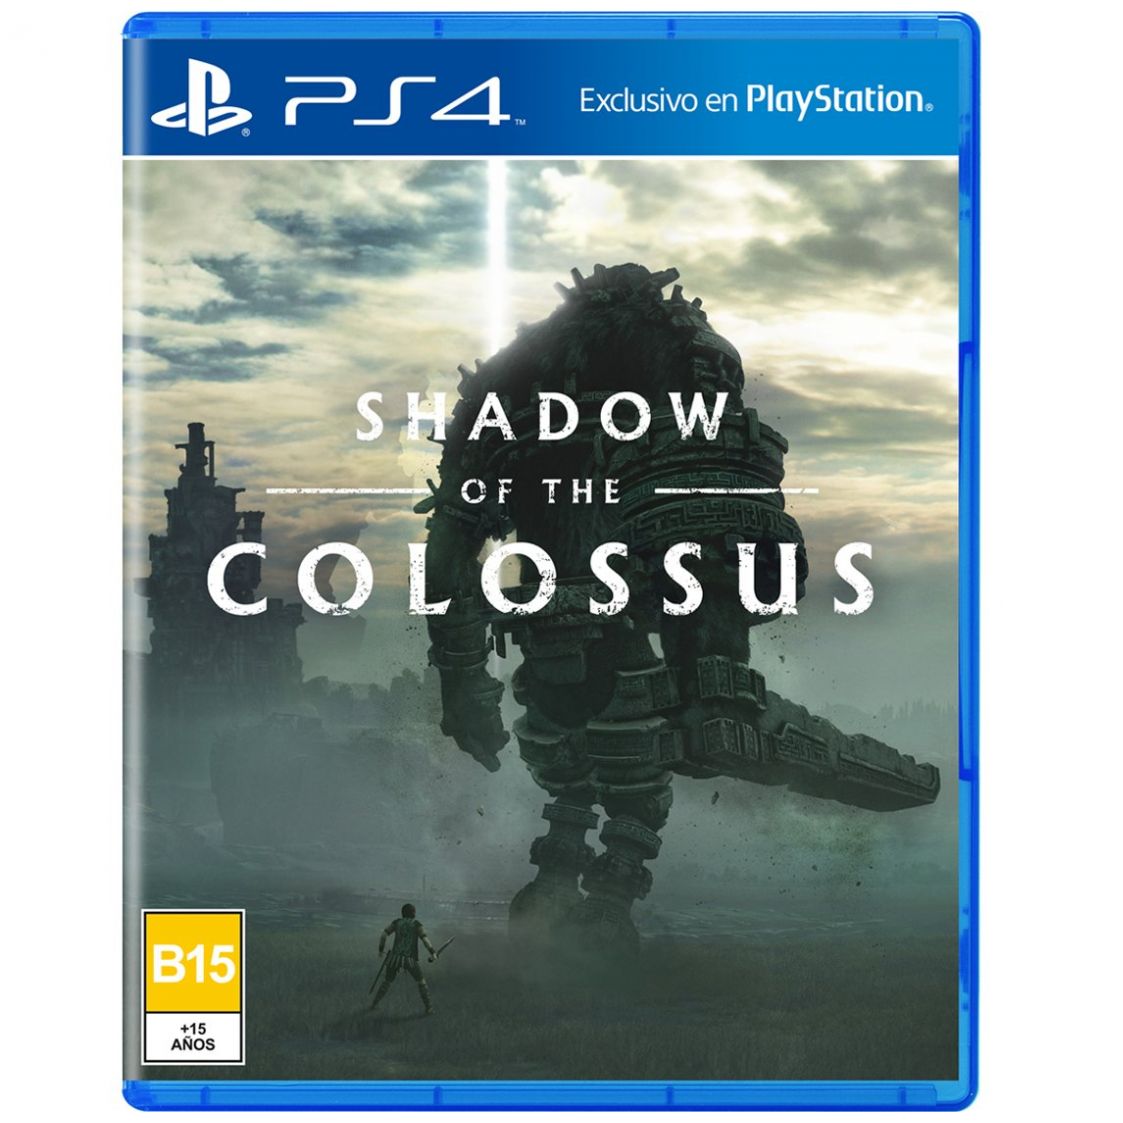 Ps4 Shadow Of The Colossus